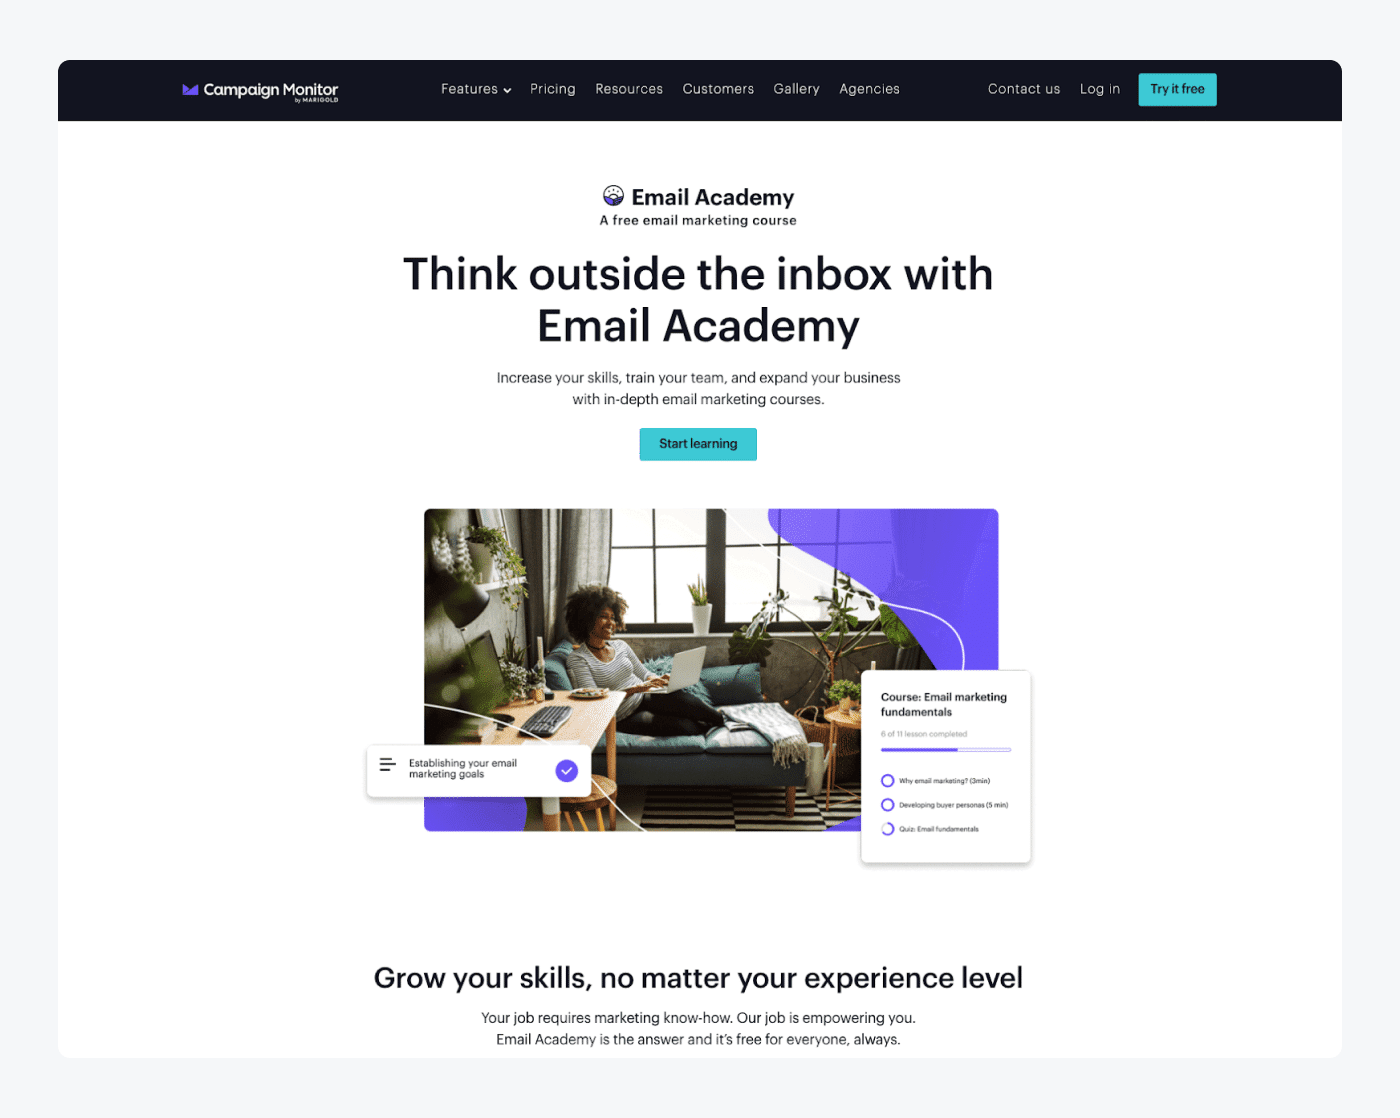 Campaign Monitor’s Email Academy landing page